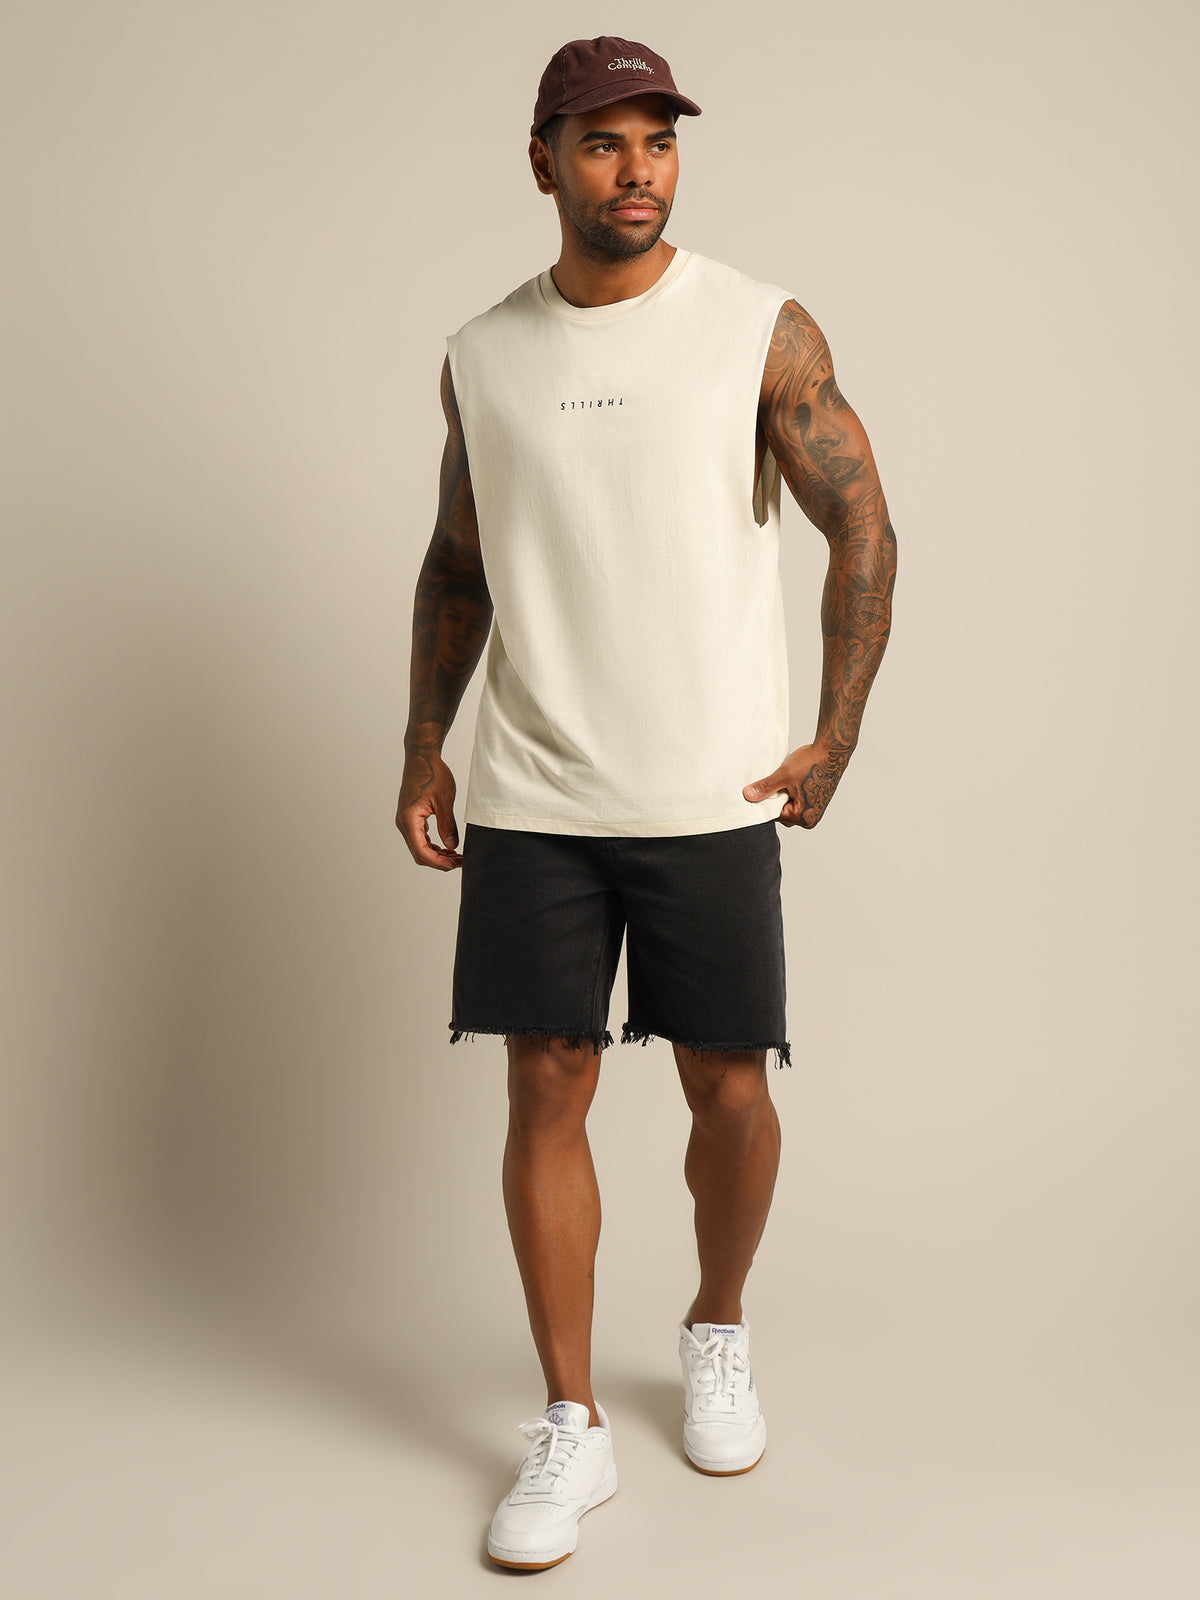 Minimal Thrills Merch Fit Muscle T-Shirt in White